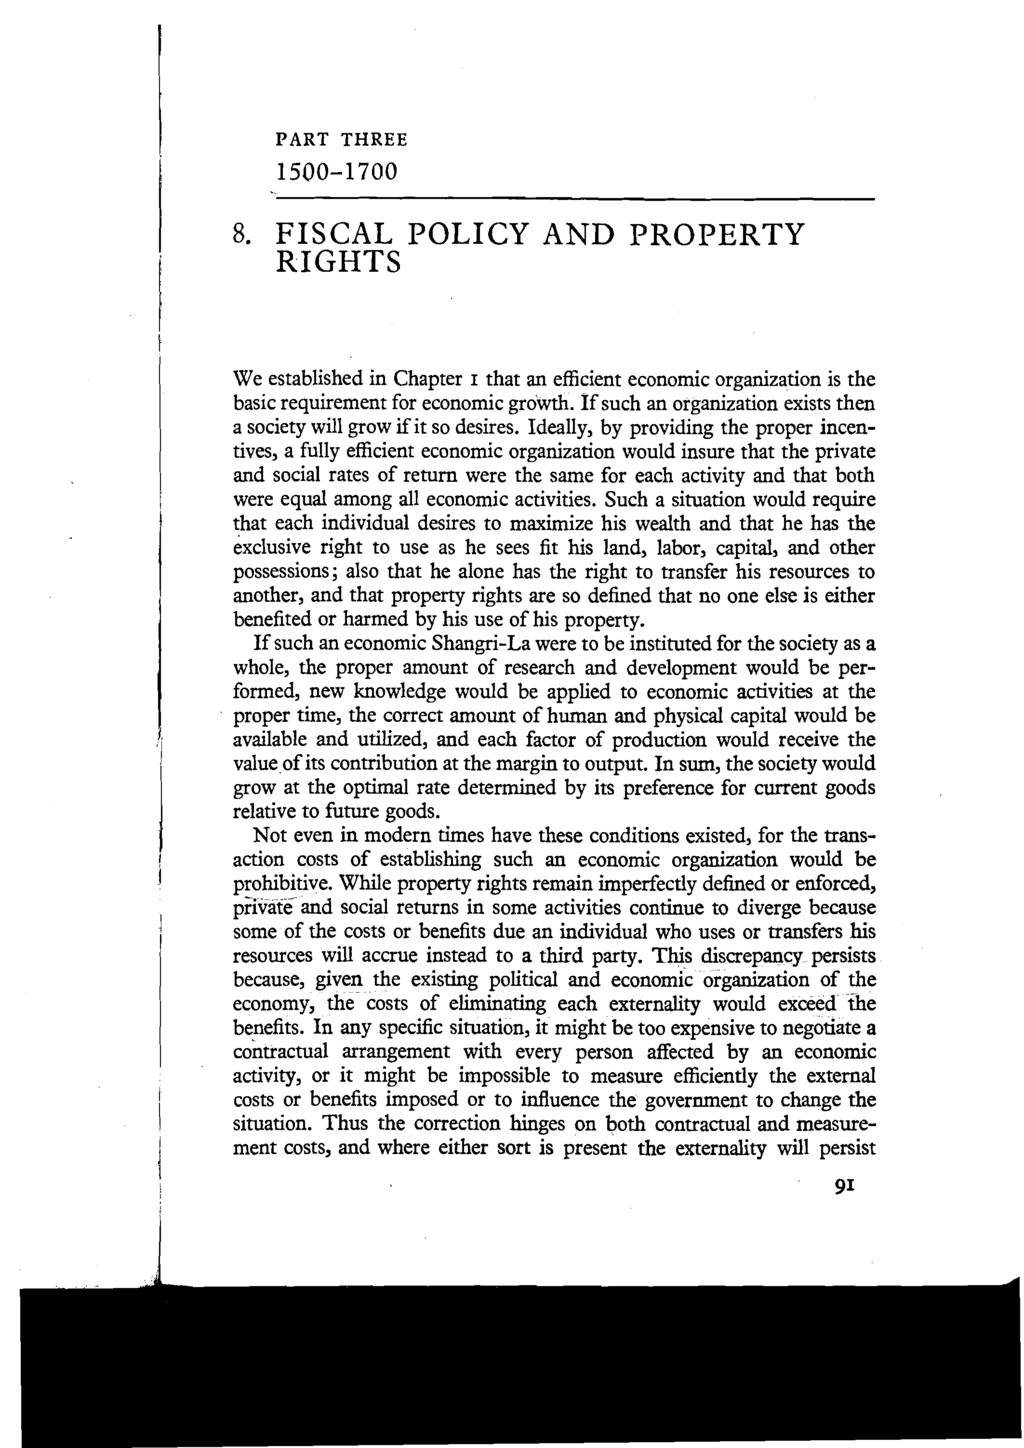 PART THREE 1500-1700 8. FISCAL POLICY AND PROPERTY RIGHTS We established in Chapter I that an efficient economic organization is the basic requirement for economic growth.